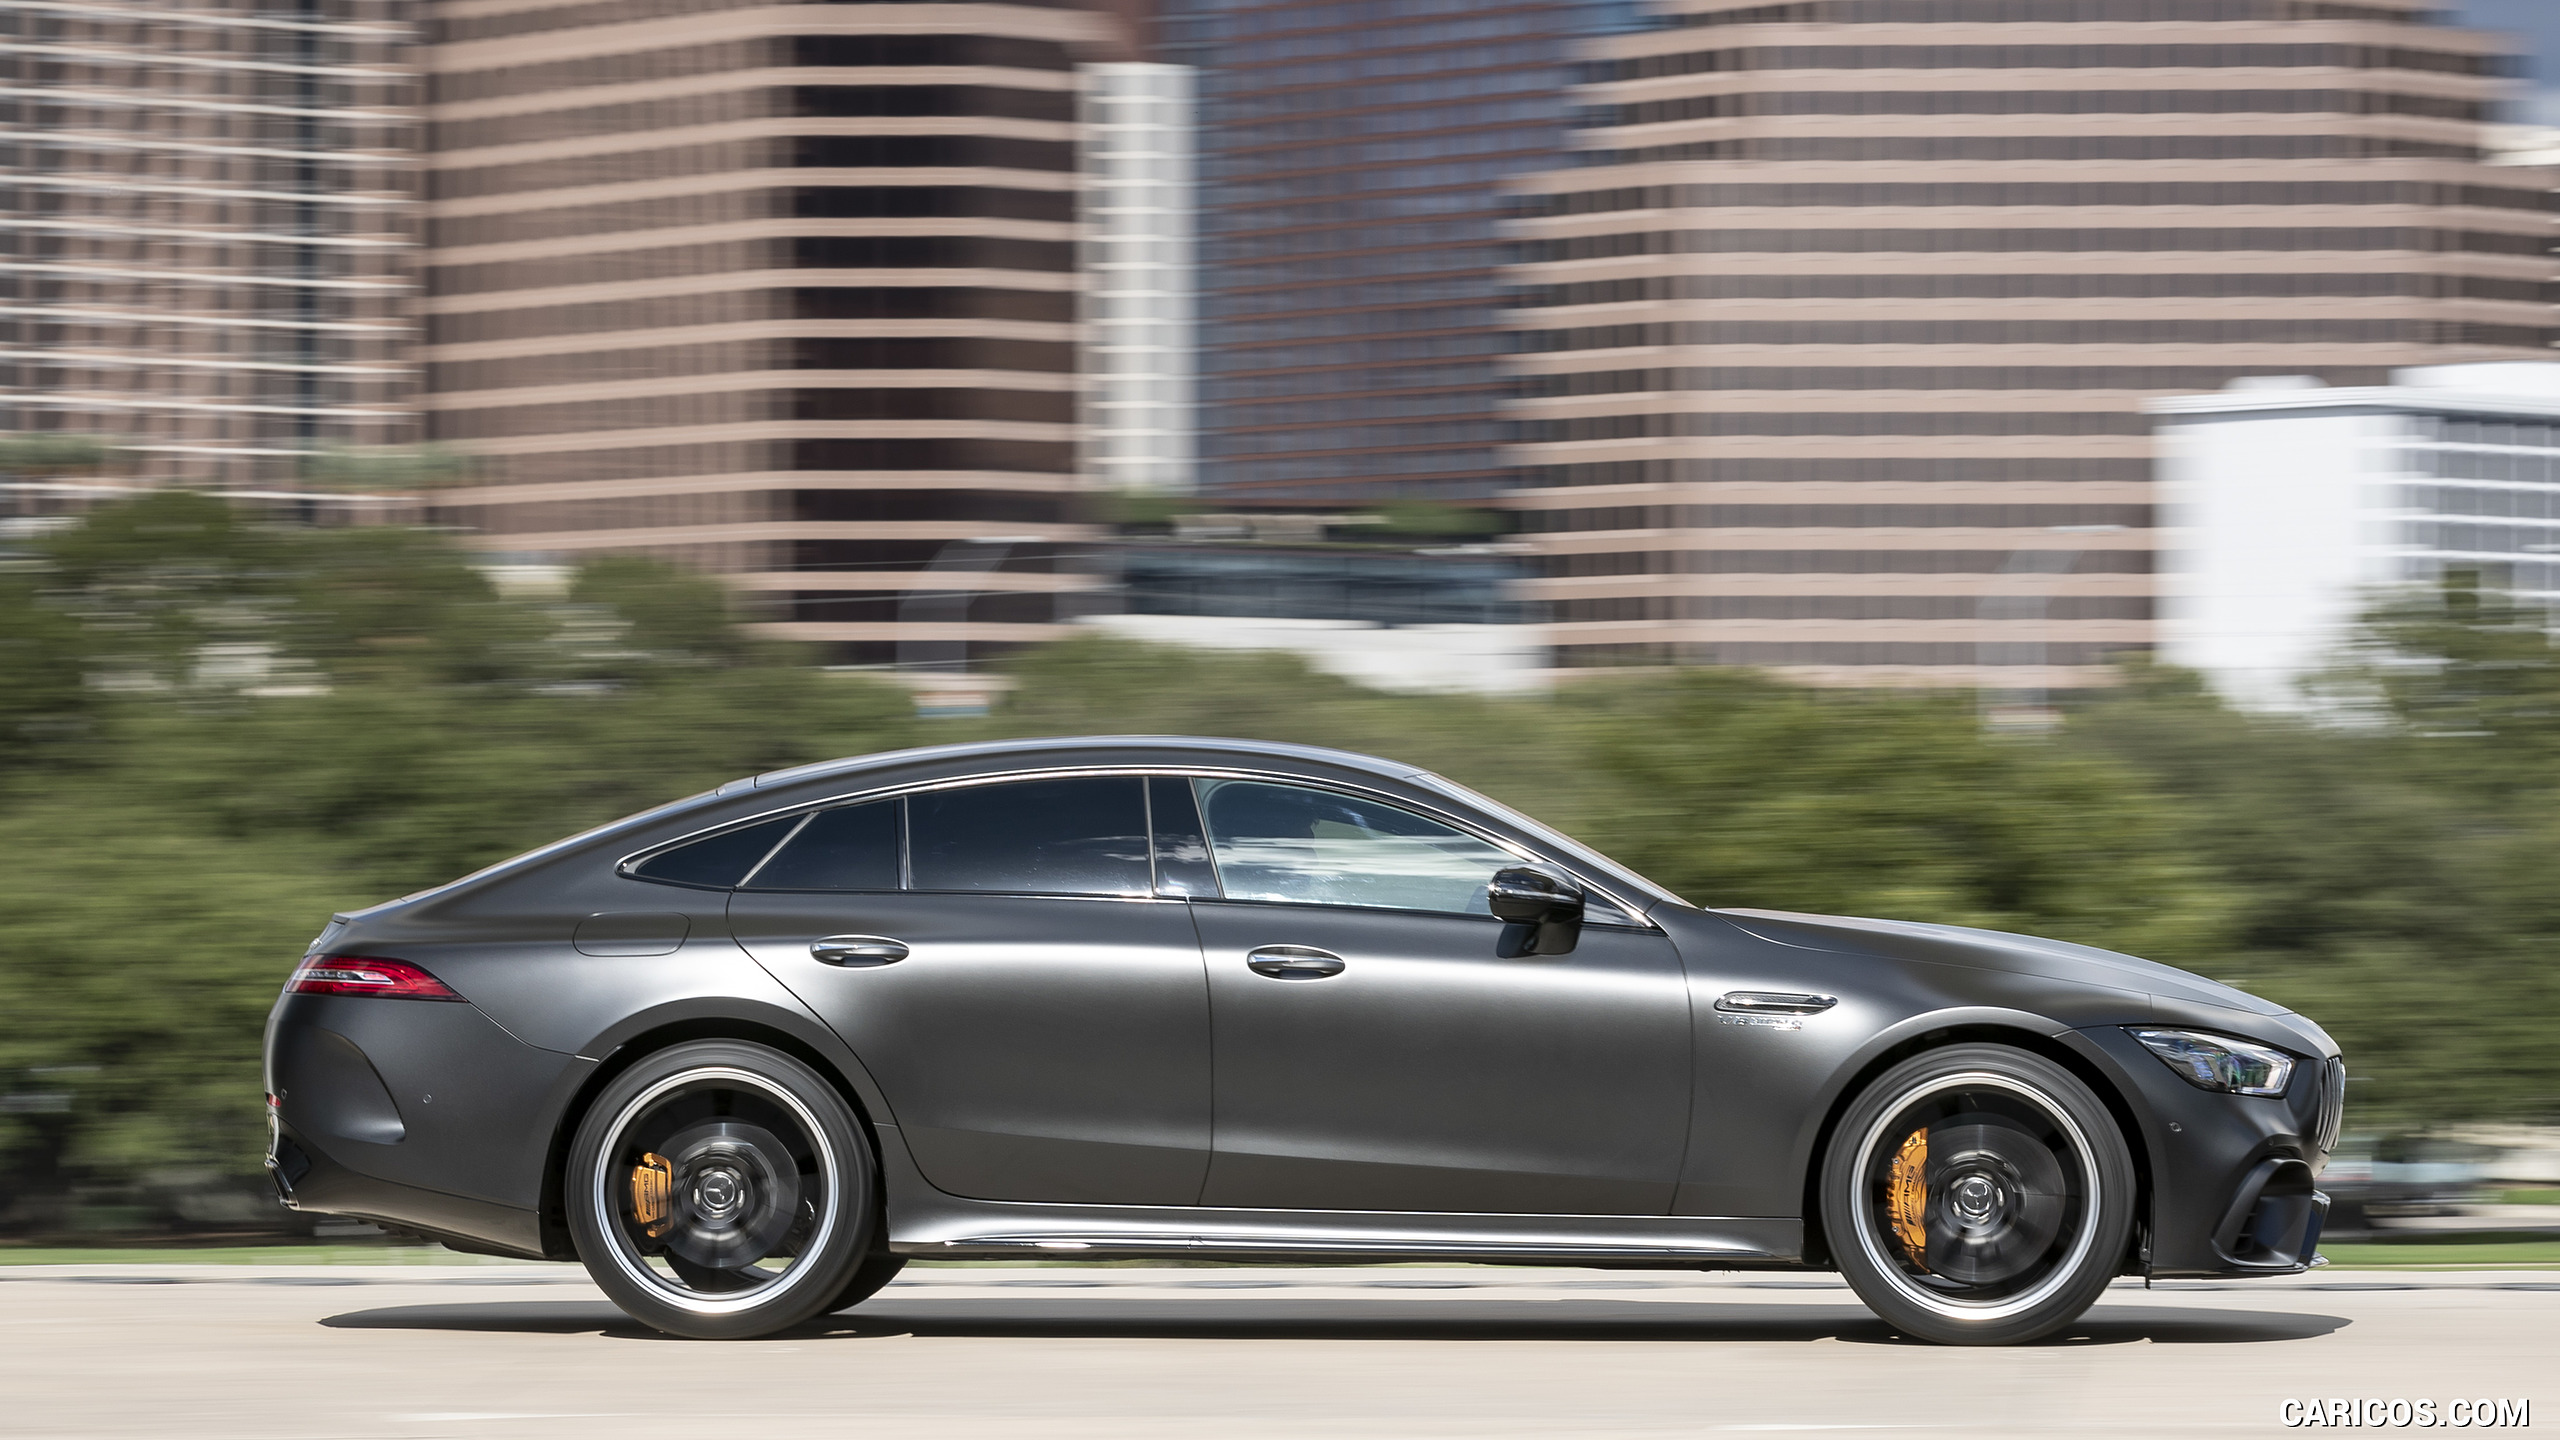 2019 Mercedes-AMG GT 63 S 4MATIC+ 4-Door Coupe - Side, #200 of 427